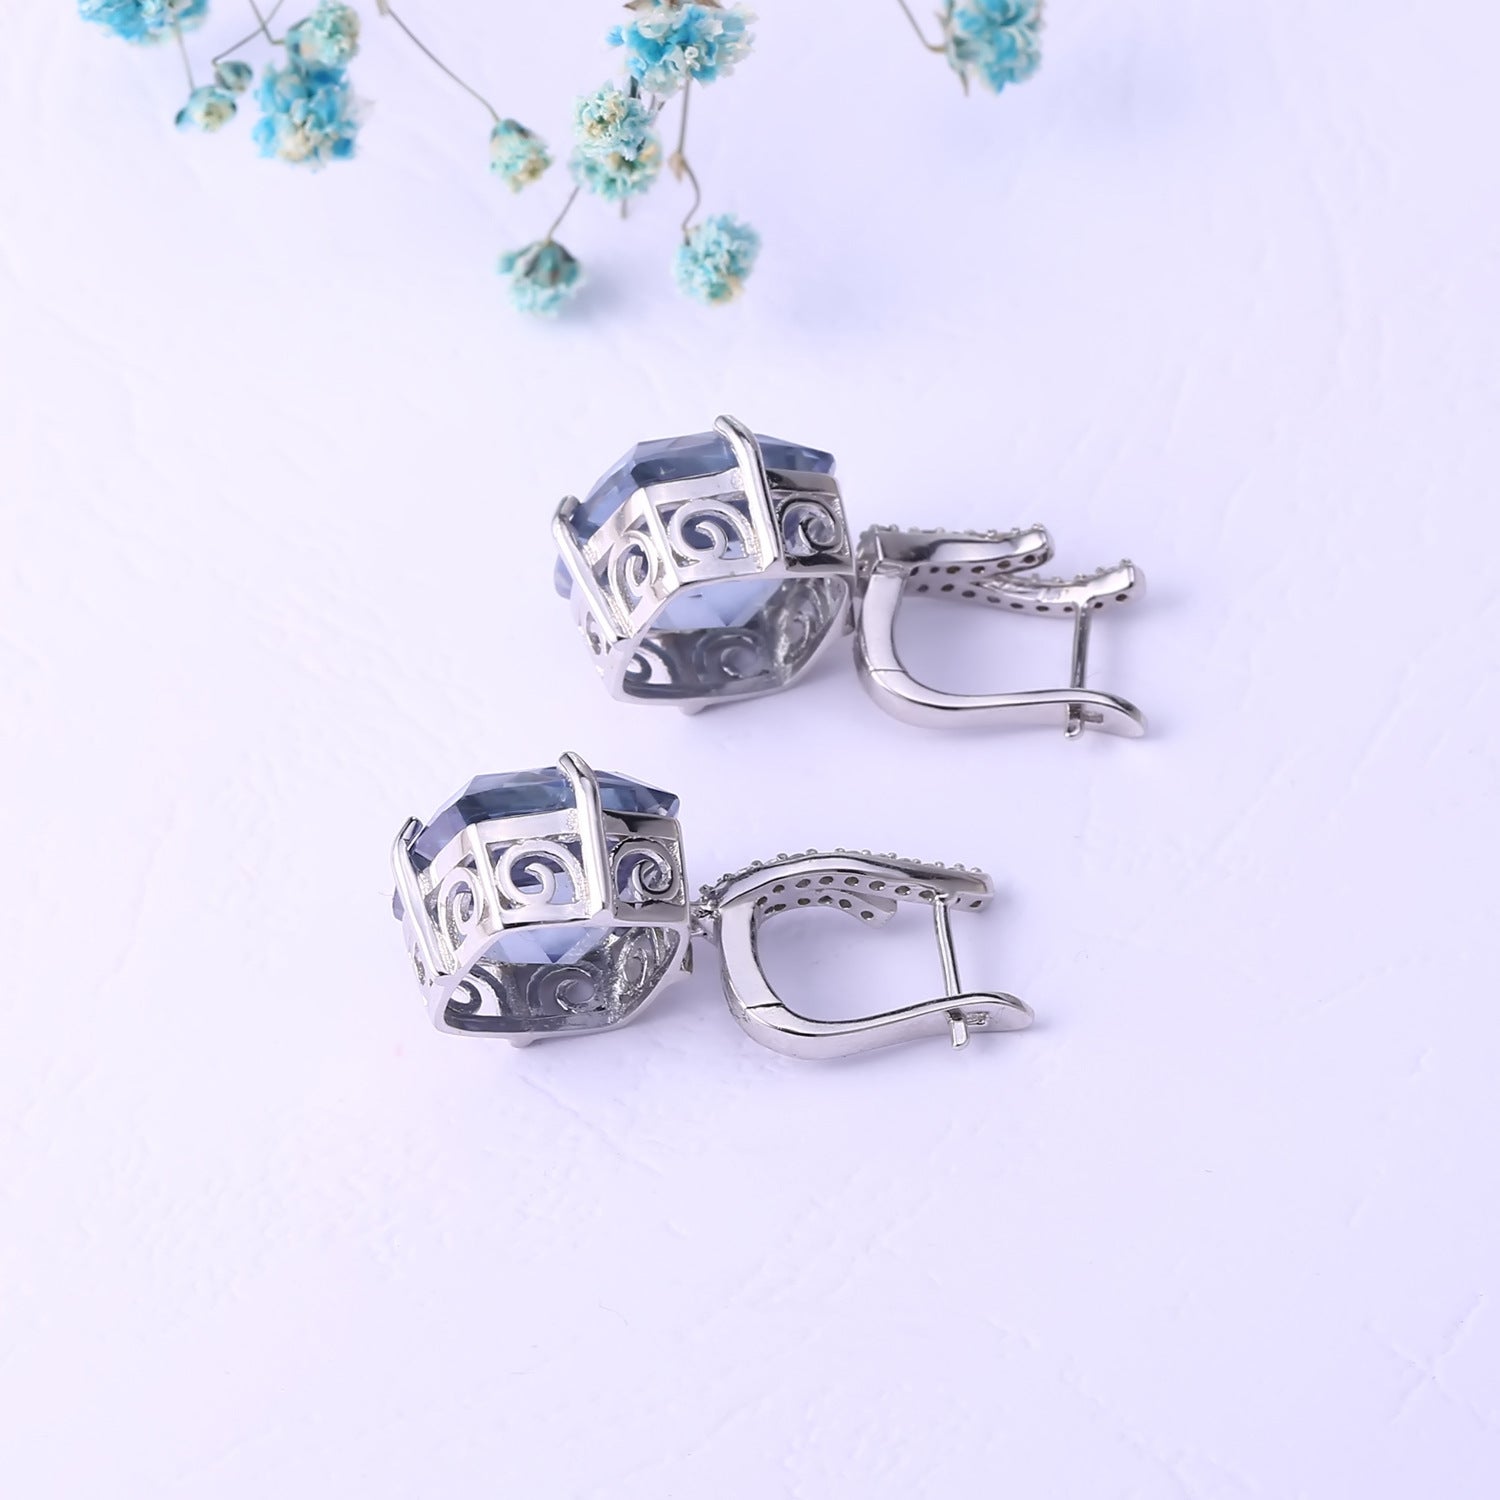 Luxury Fashion Inlaid Crystal Square Silver Drop Earrings for Women